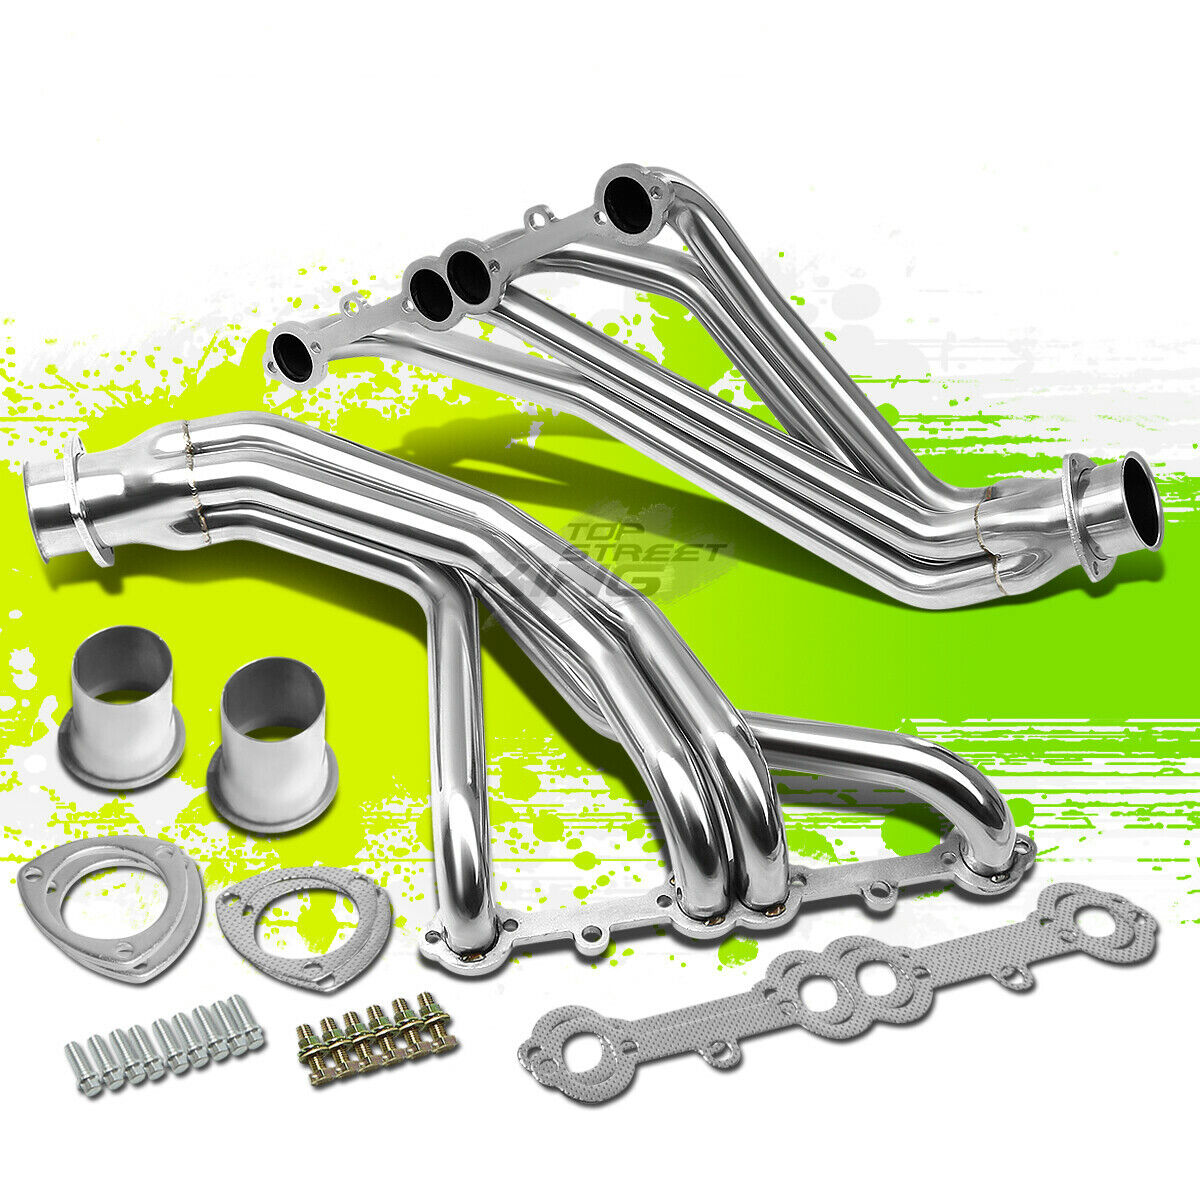 FOR 84-91 CHEVY C/K 5.0L-5.7L 8-2 STAINLESS STEEL LONG EXHAUST HEADER MANIFOLD